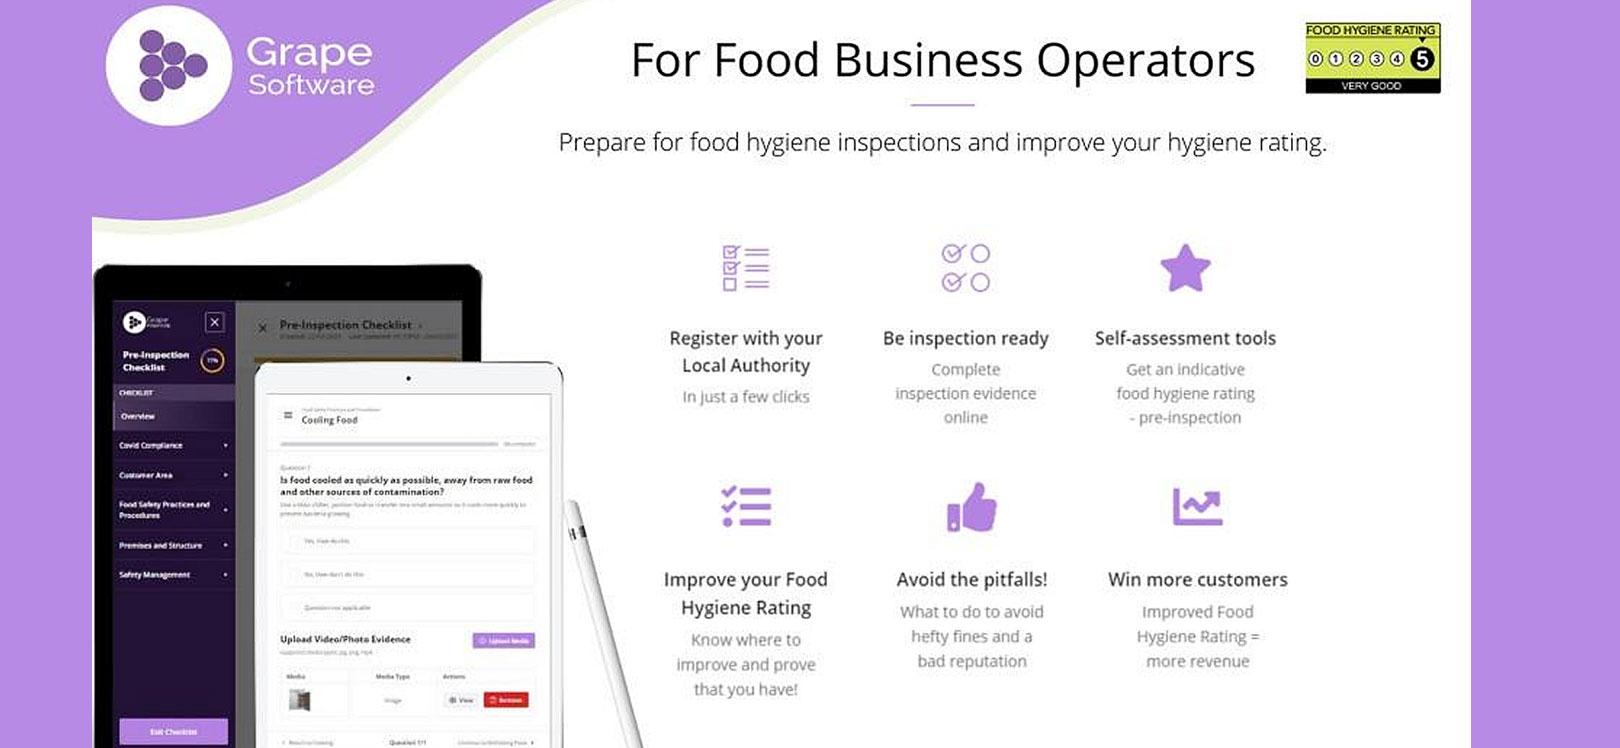 Grape Software for food business